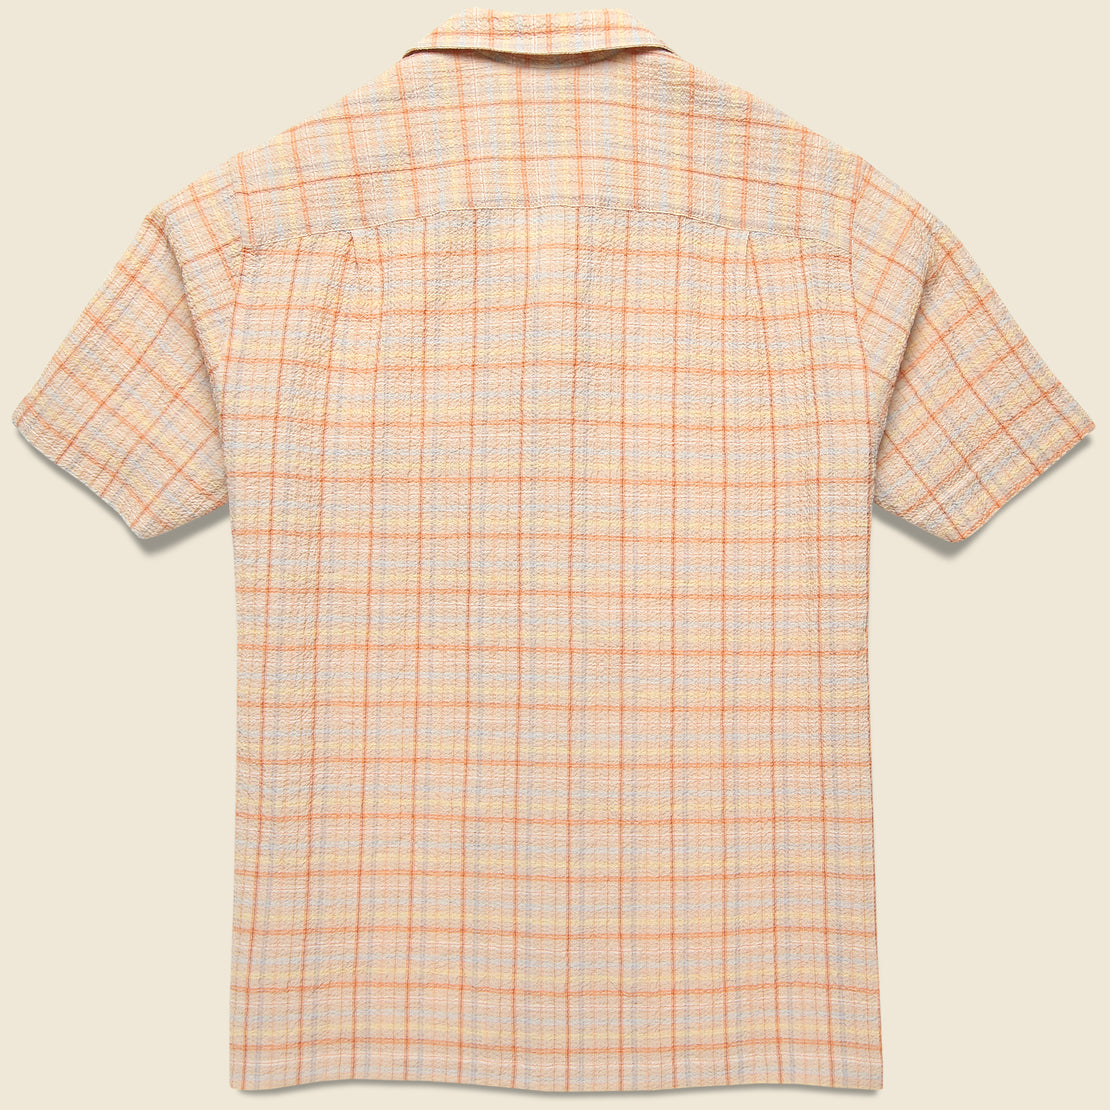 Plaid Crepe Camp Shirt - Multi - Portuguese Flannel - STAG Provisions - Tops - S/S Woven - Plaid